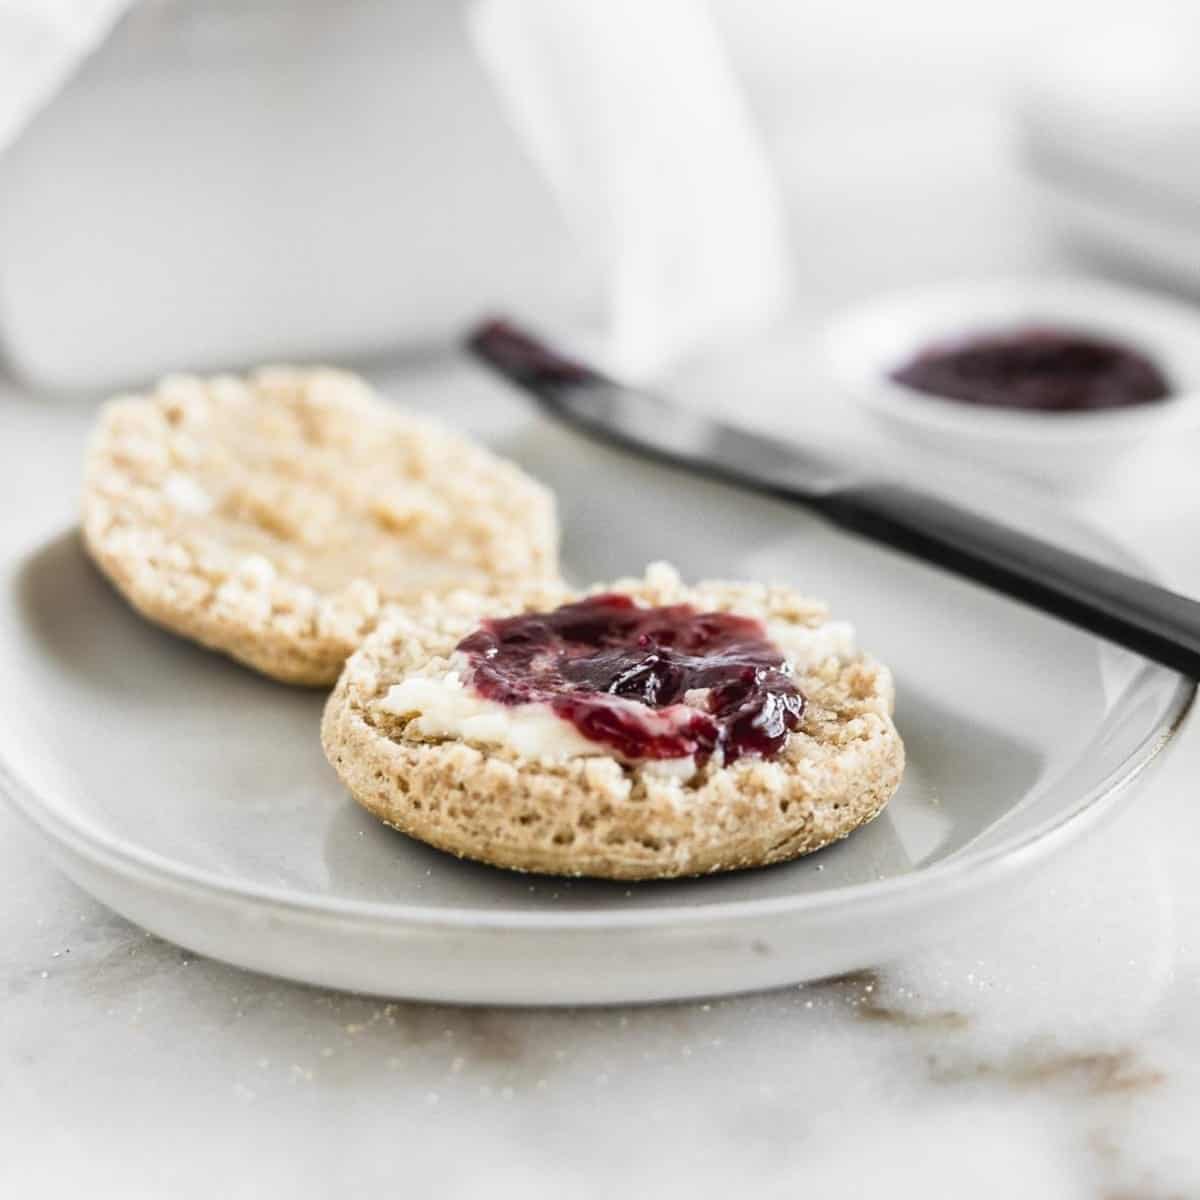 Scones with jam on a plate.